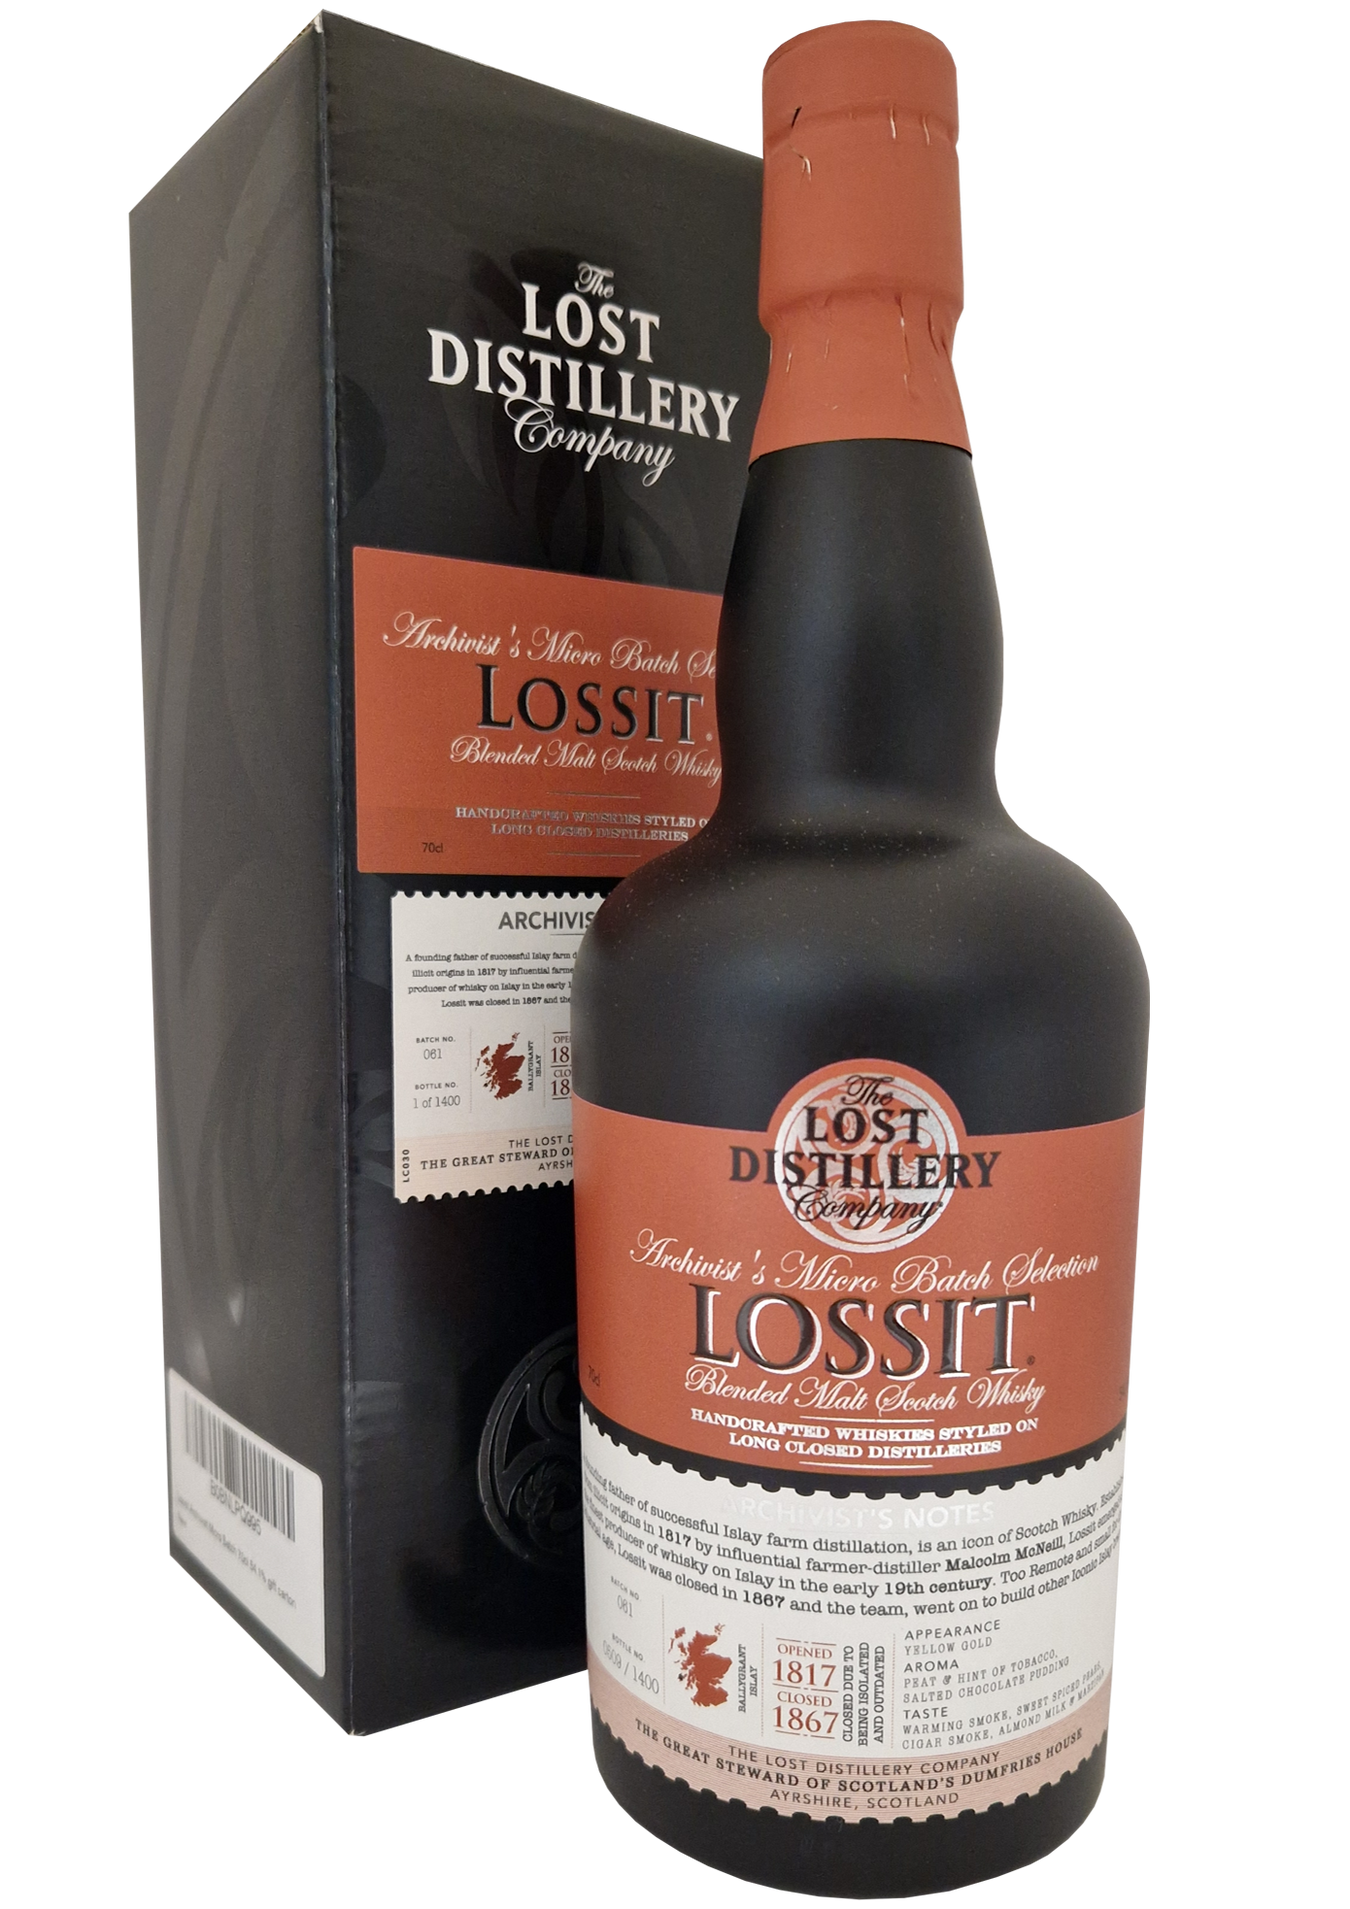 The Lost Distillery